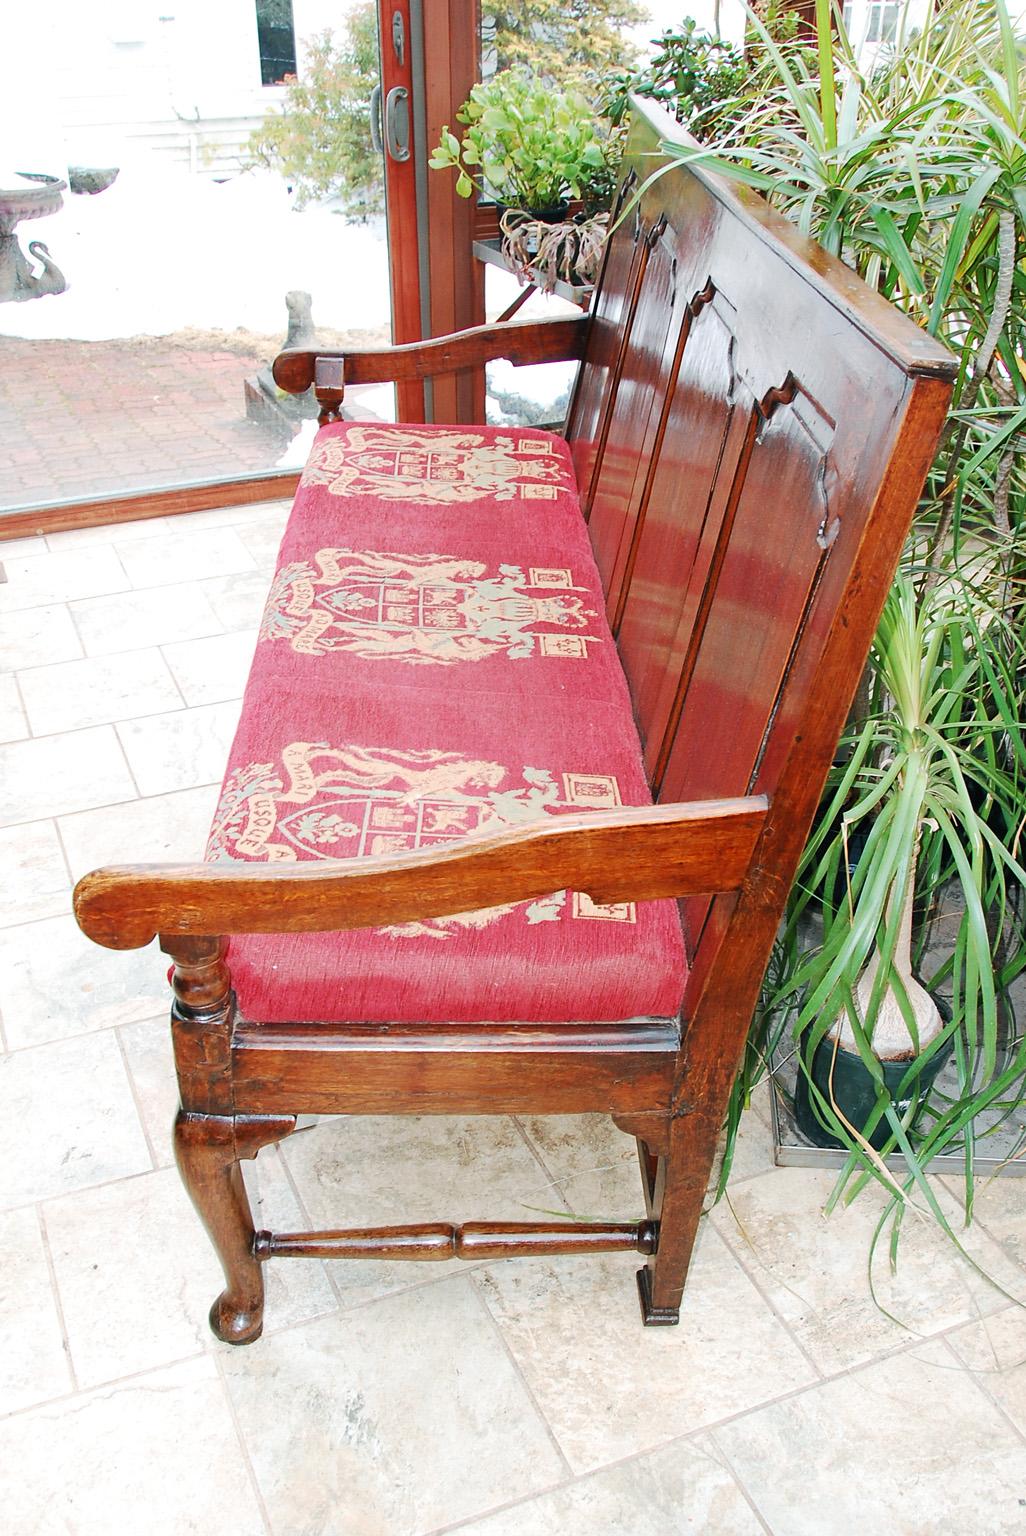 English George II period oak paneled back settle with upholstered seat. This settle has four fielded shaped panels which form the back. There are shrinkage cracks to the panels, but they have been repaired and in one case reinforced from the back of